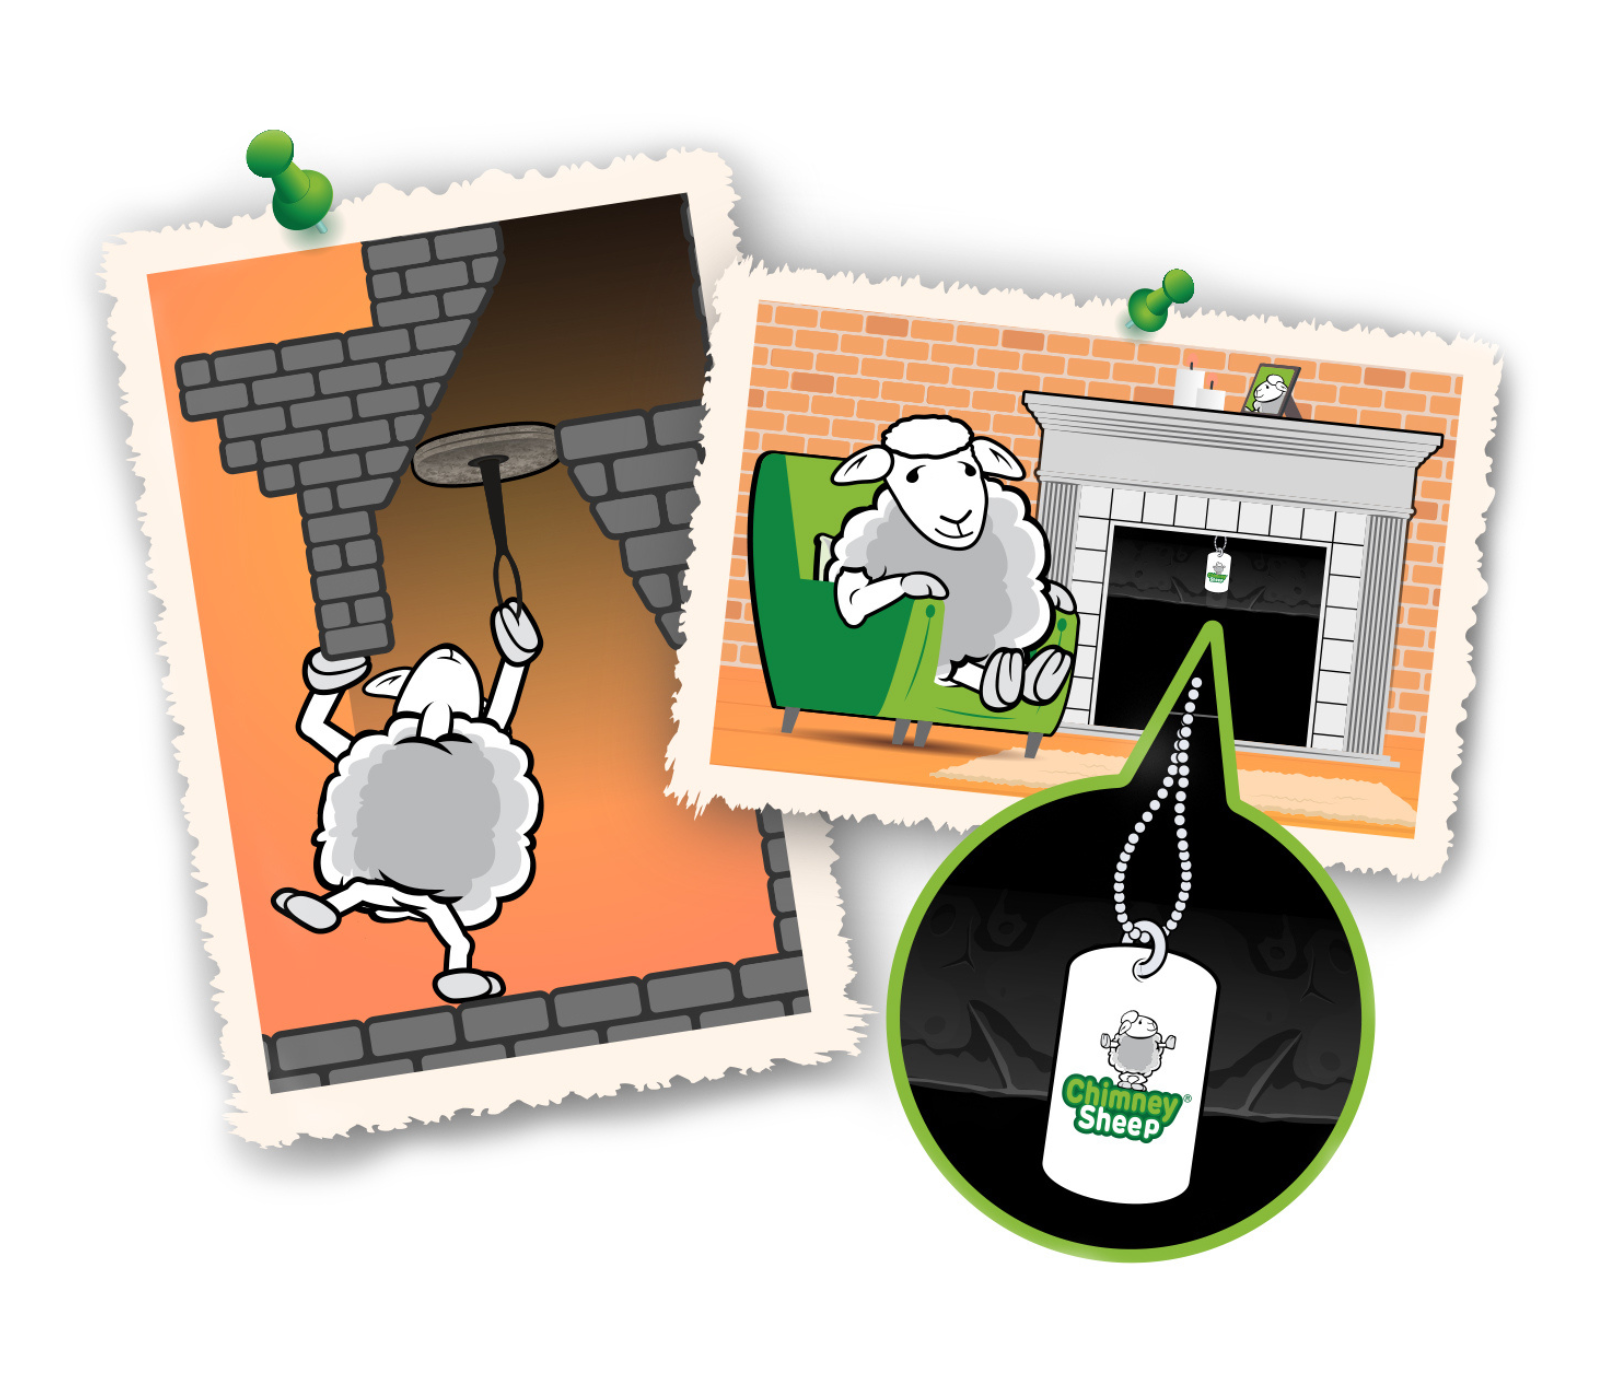 How to measure your chimney for a Chimney Sheep® chimney draught